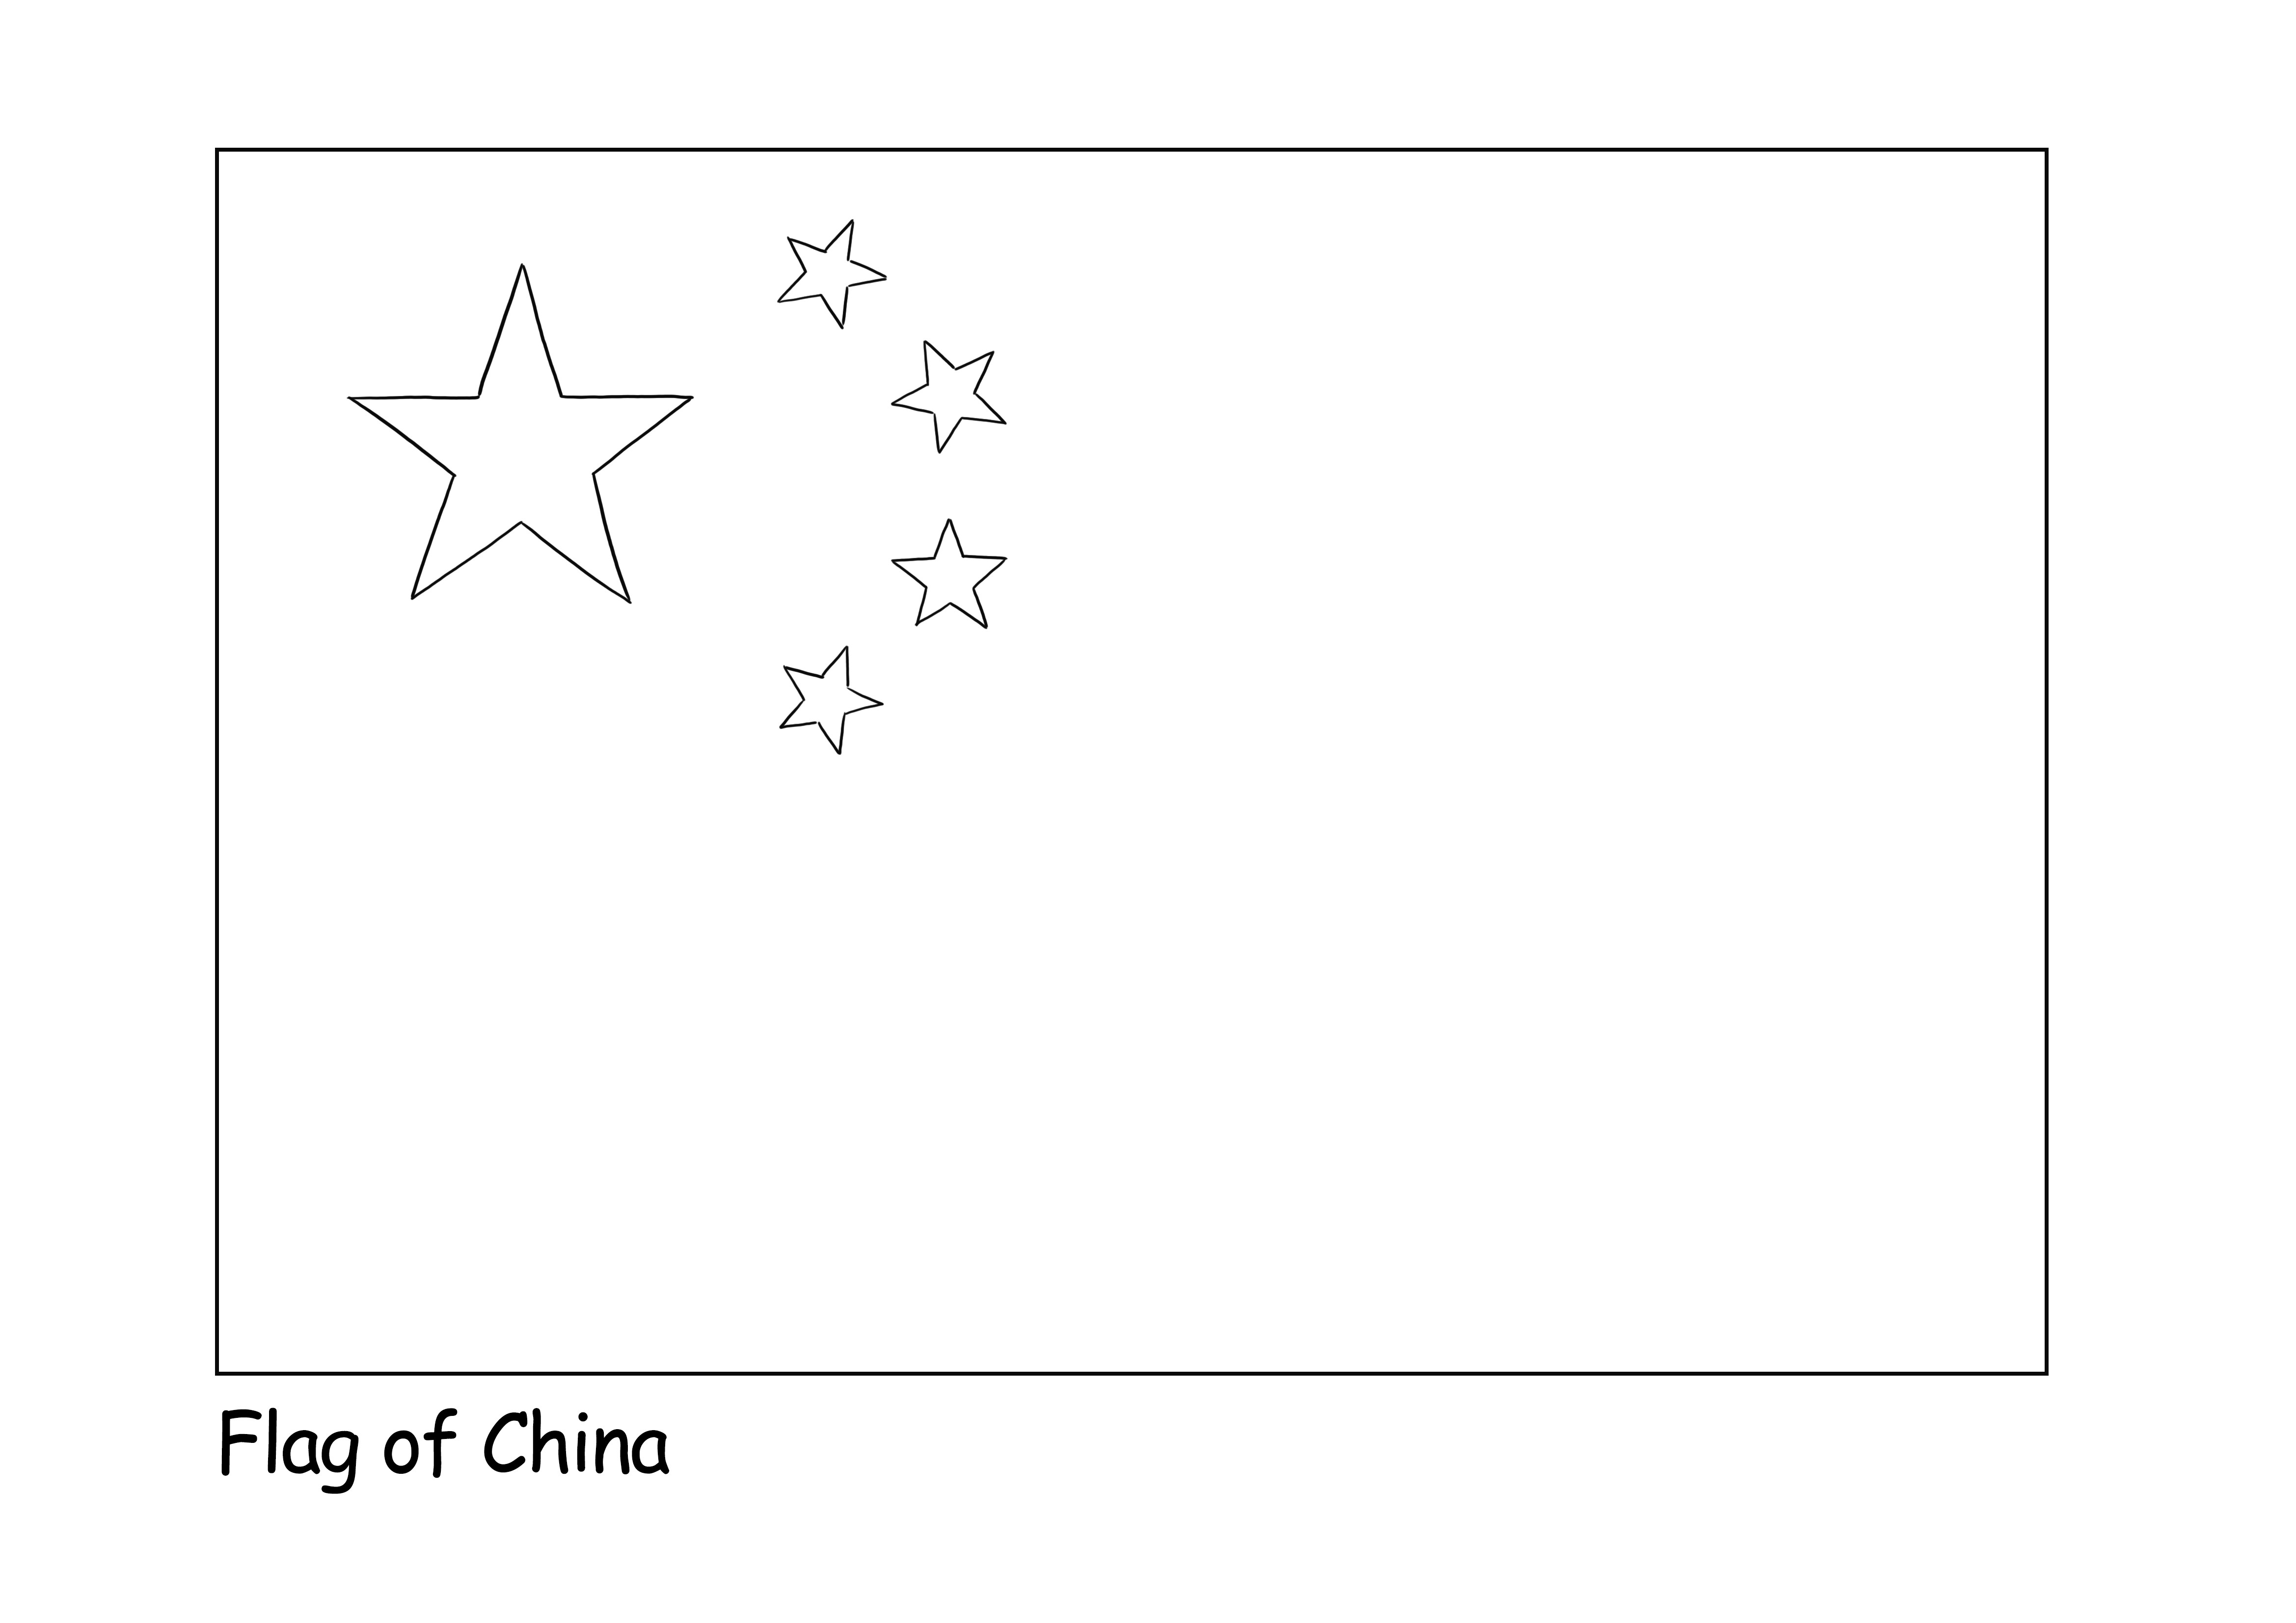 Free coloring sheet Flag of China for kids to learn about different country flags